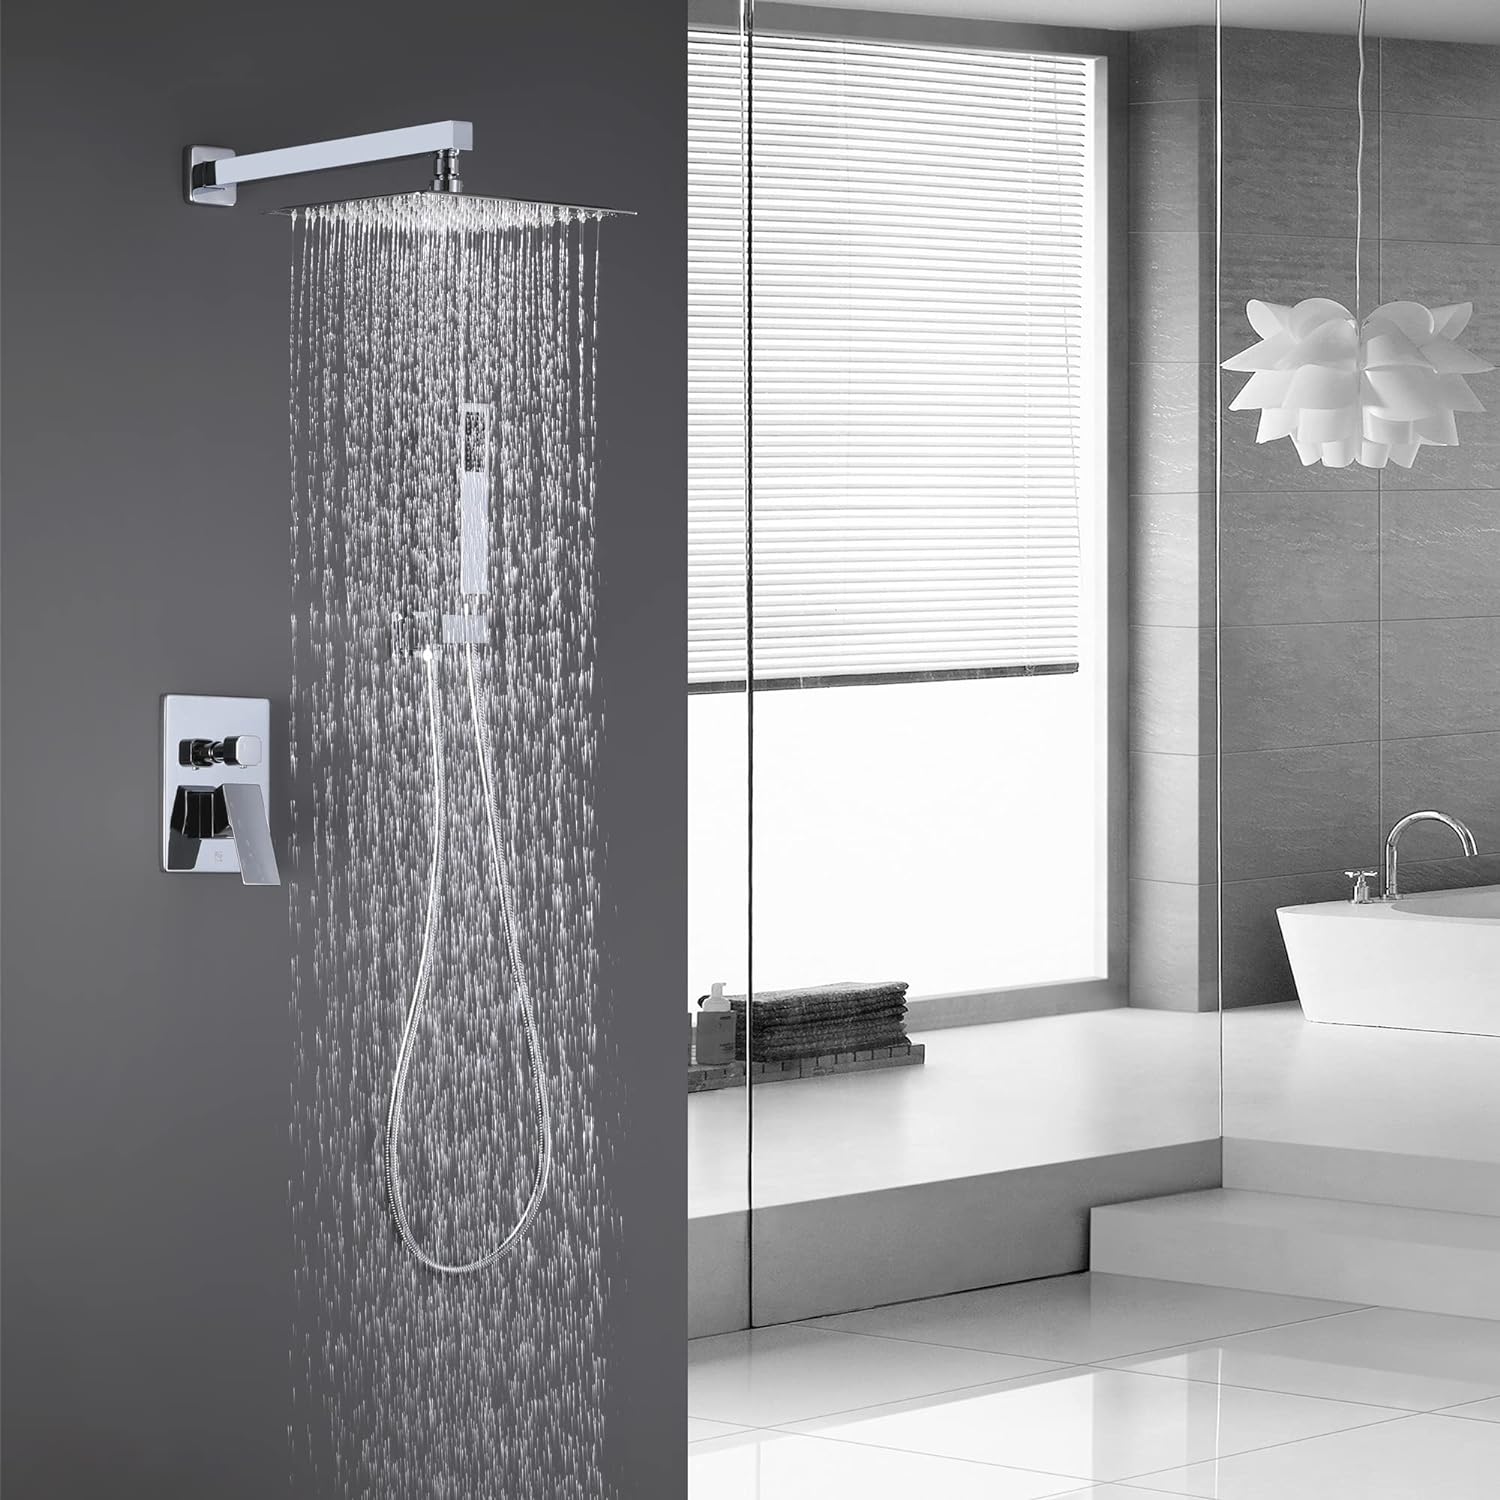 Buy Bathroom Concealed Wall Mounted Two-Function Square Overhead Rain Shower Set Chrome/Matte Black - RS-9007 & RS-9007B | Shop at Supply Master Accra, Ghana Shower Set Chrome Buy Tools hardware Building materials